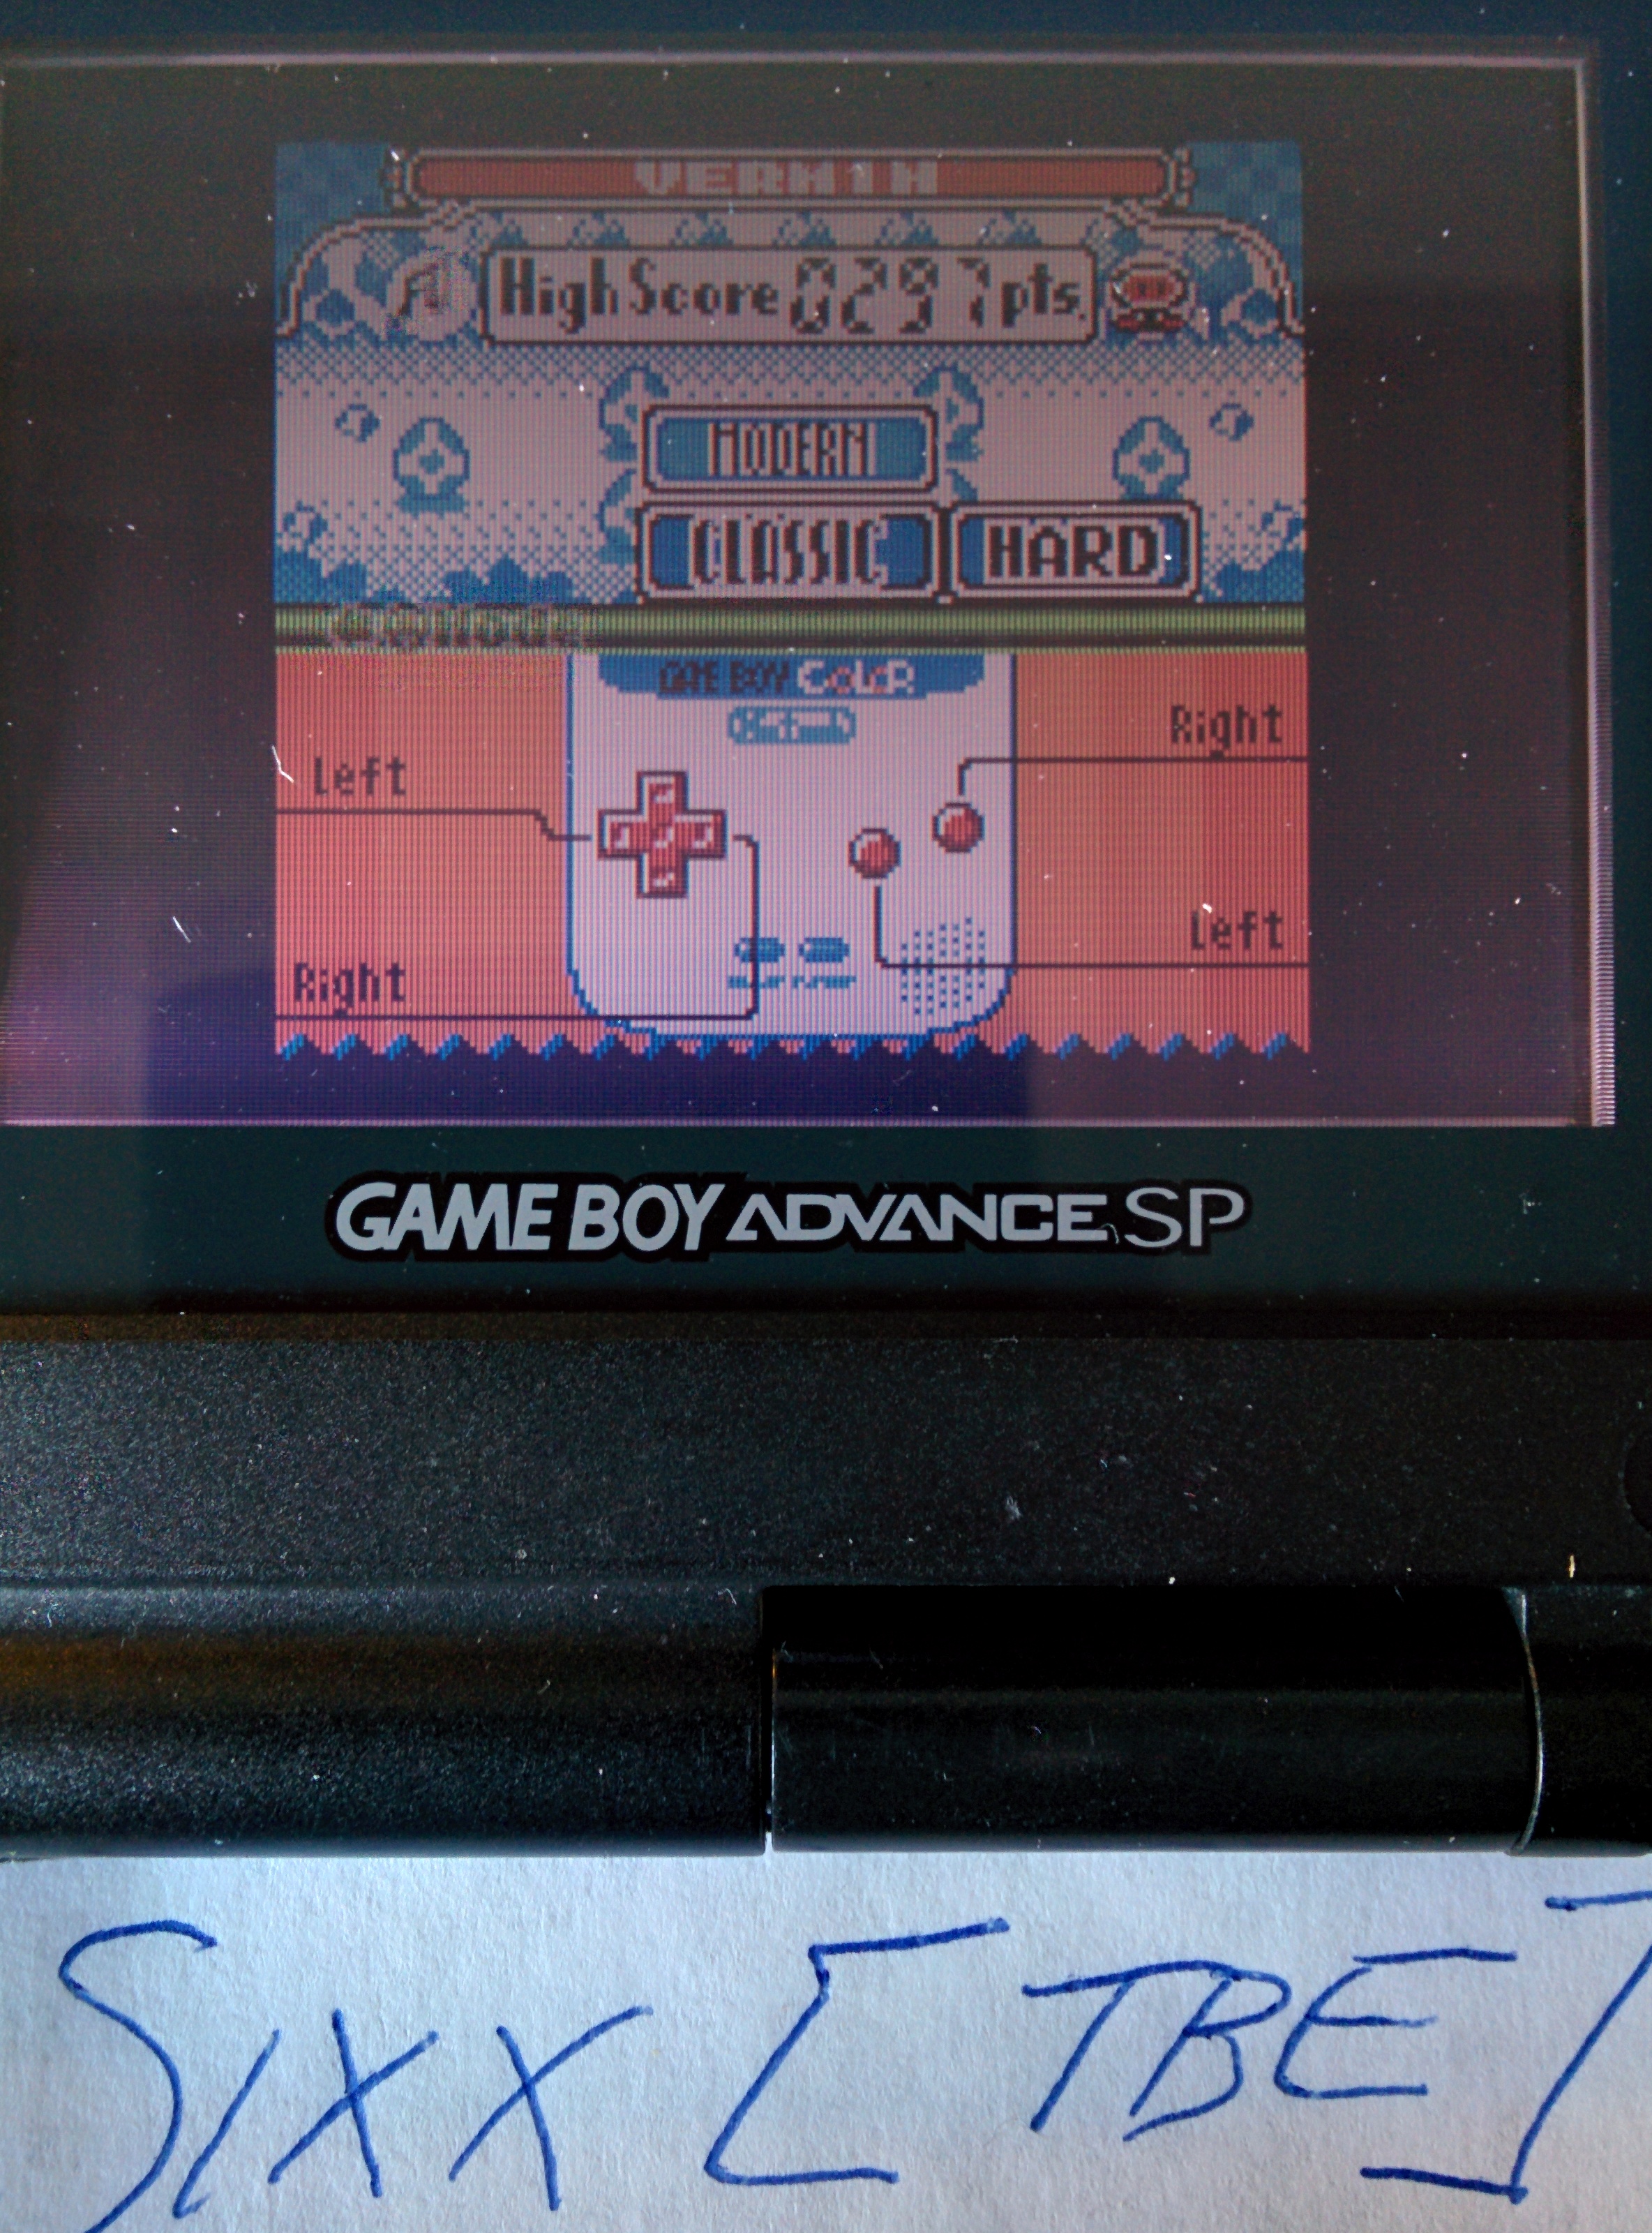 Sixx: Game & Watch Gallery 2: Vermin: Classic: Hard (Game Boy Color) 297 points on 2014-08-24 10:50:59